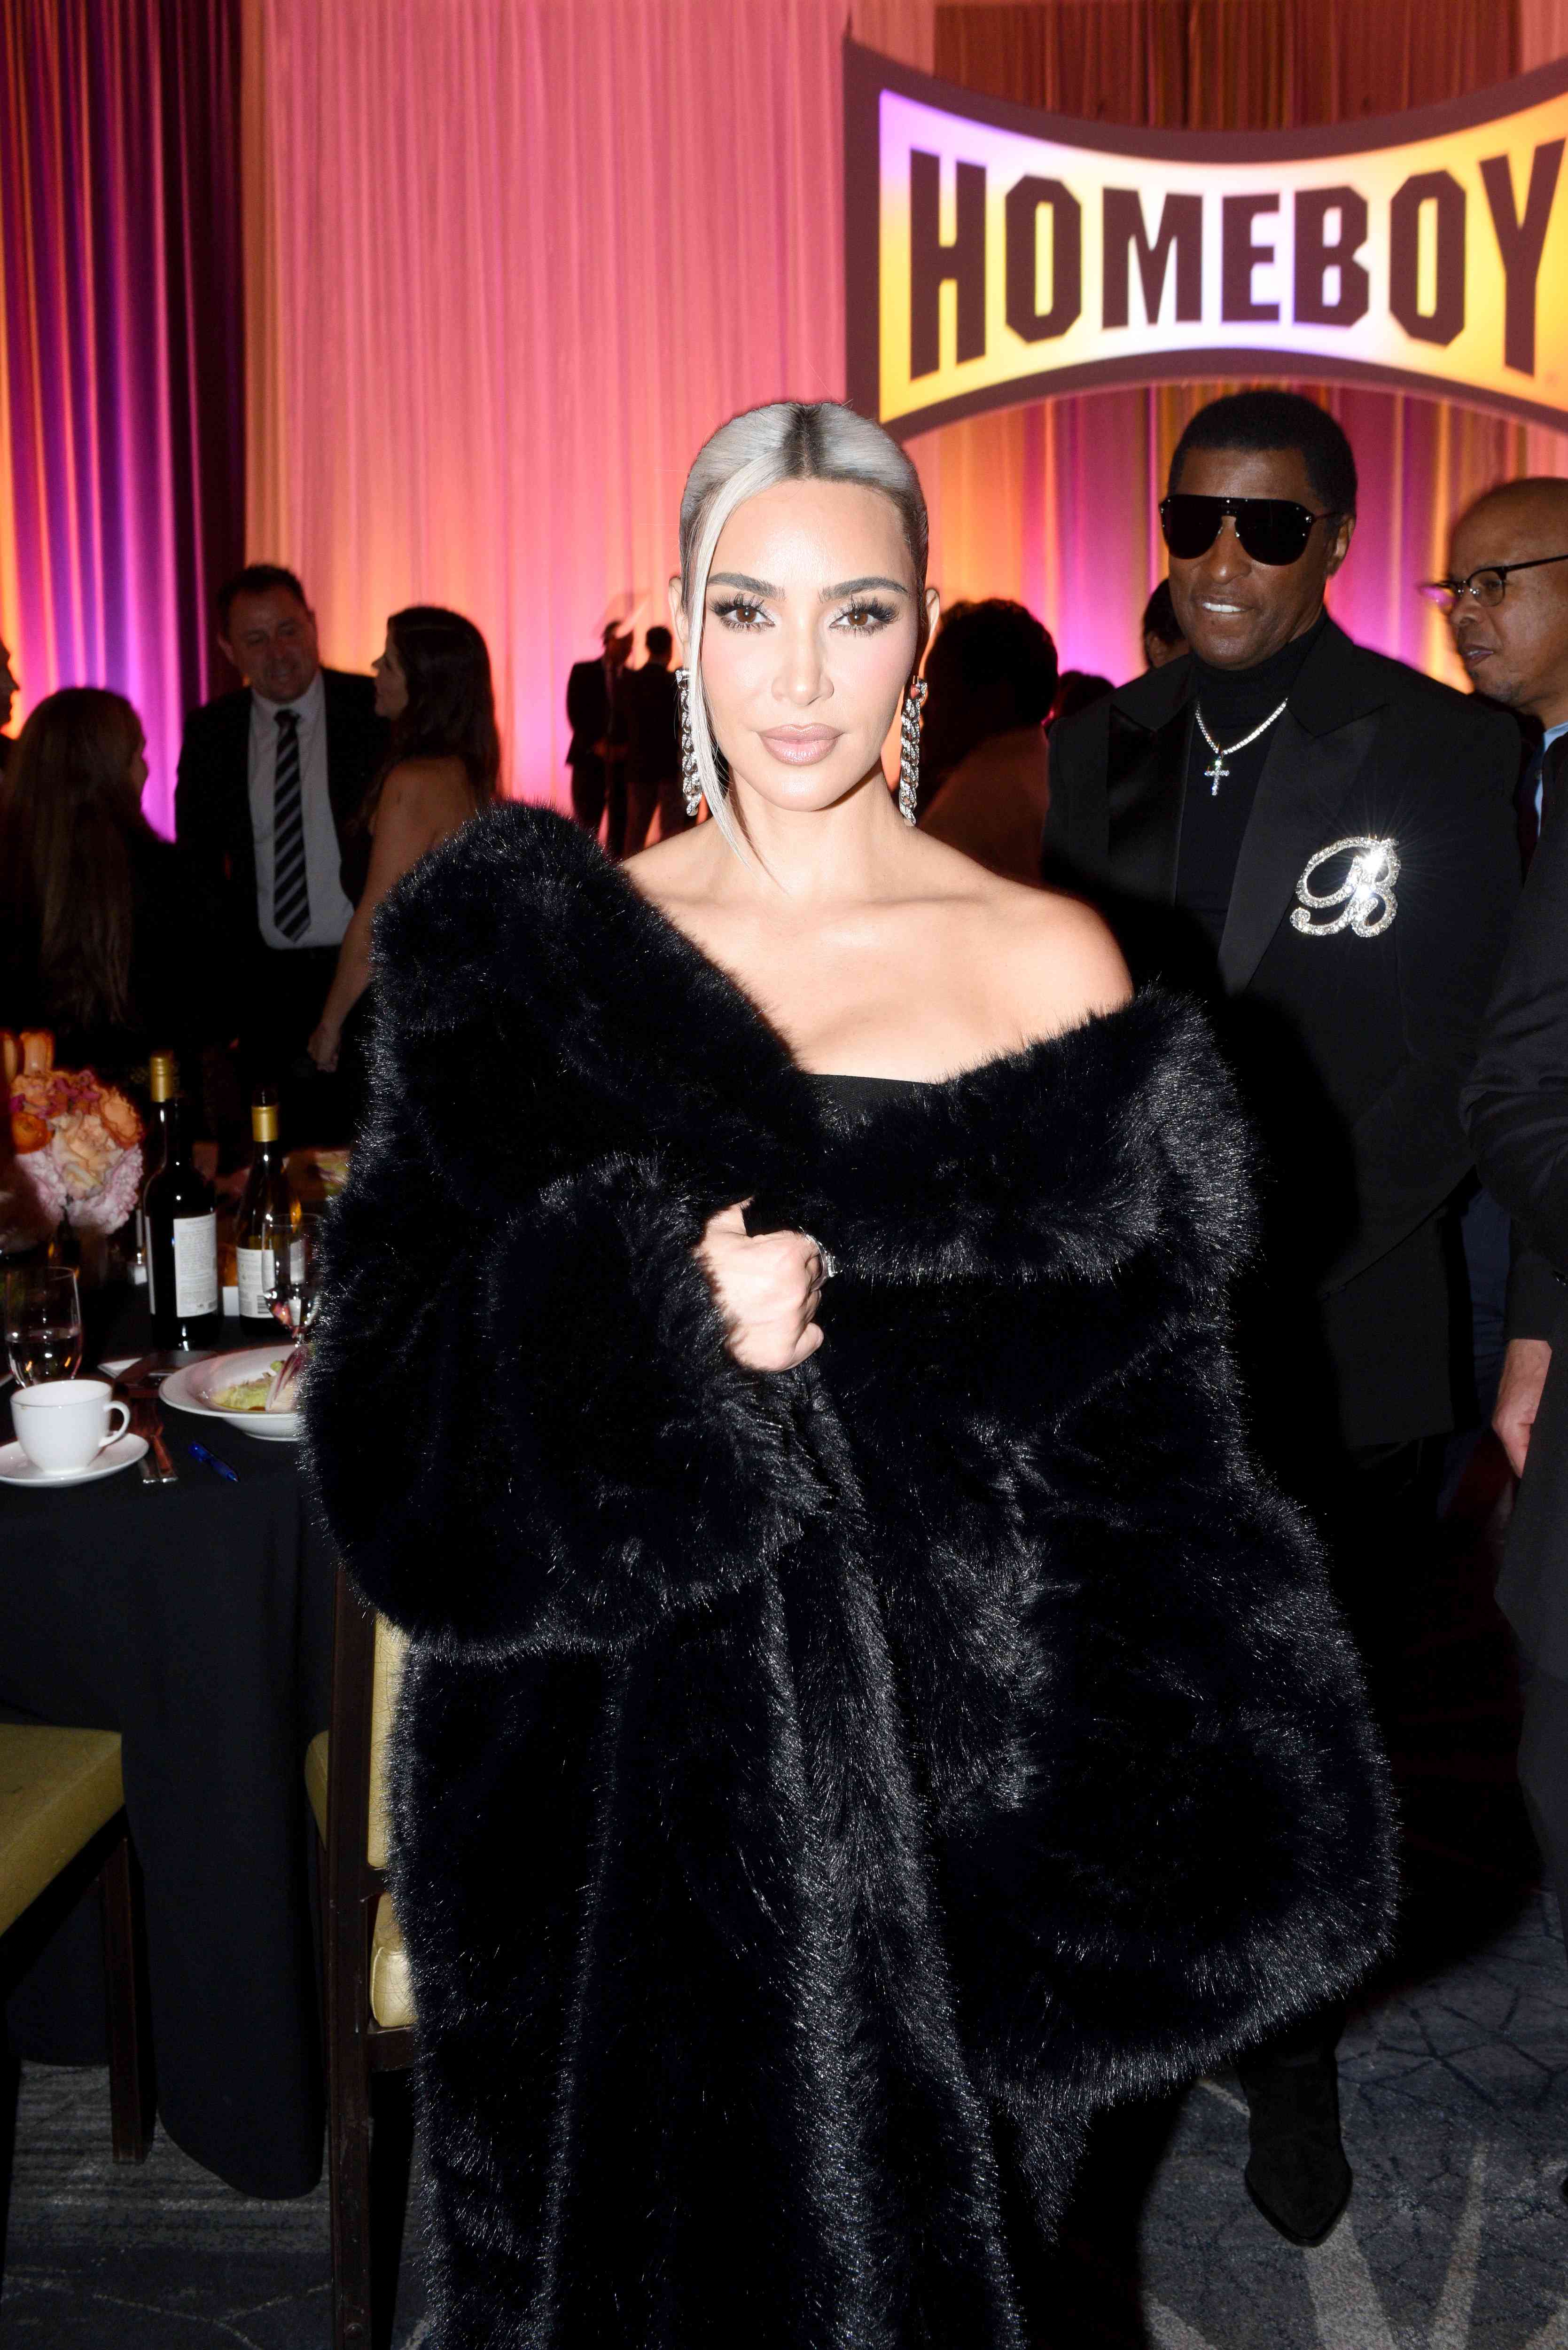 Kim Kardashian's New Icy Blonde Hair Is the Lightest It's Been in Years